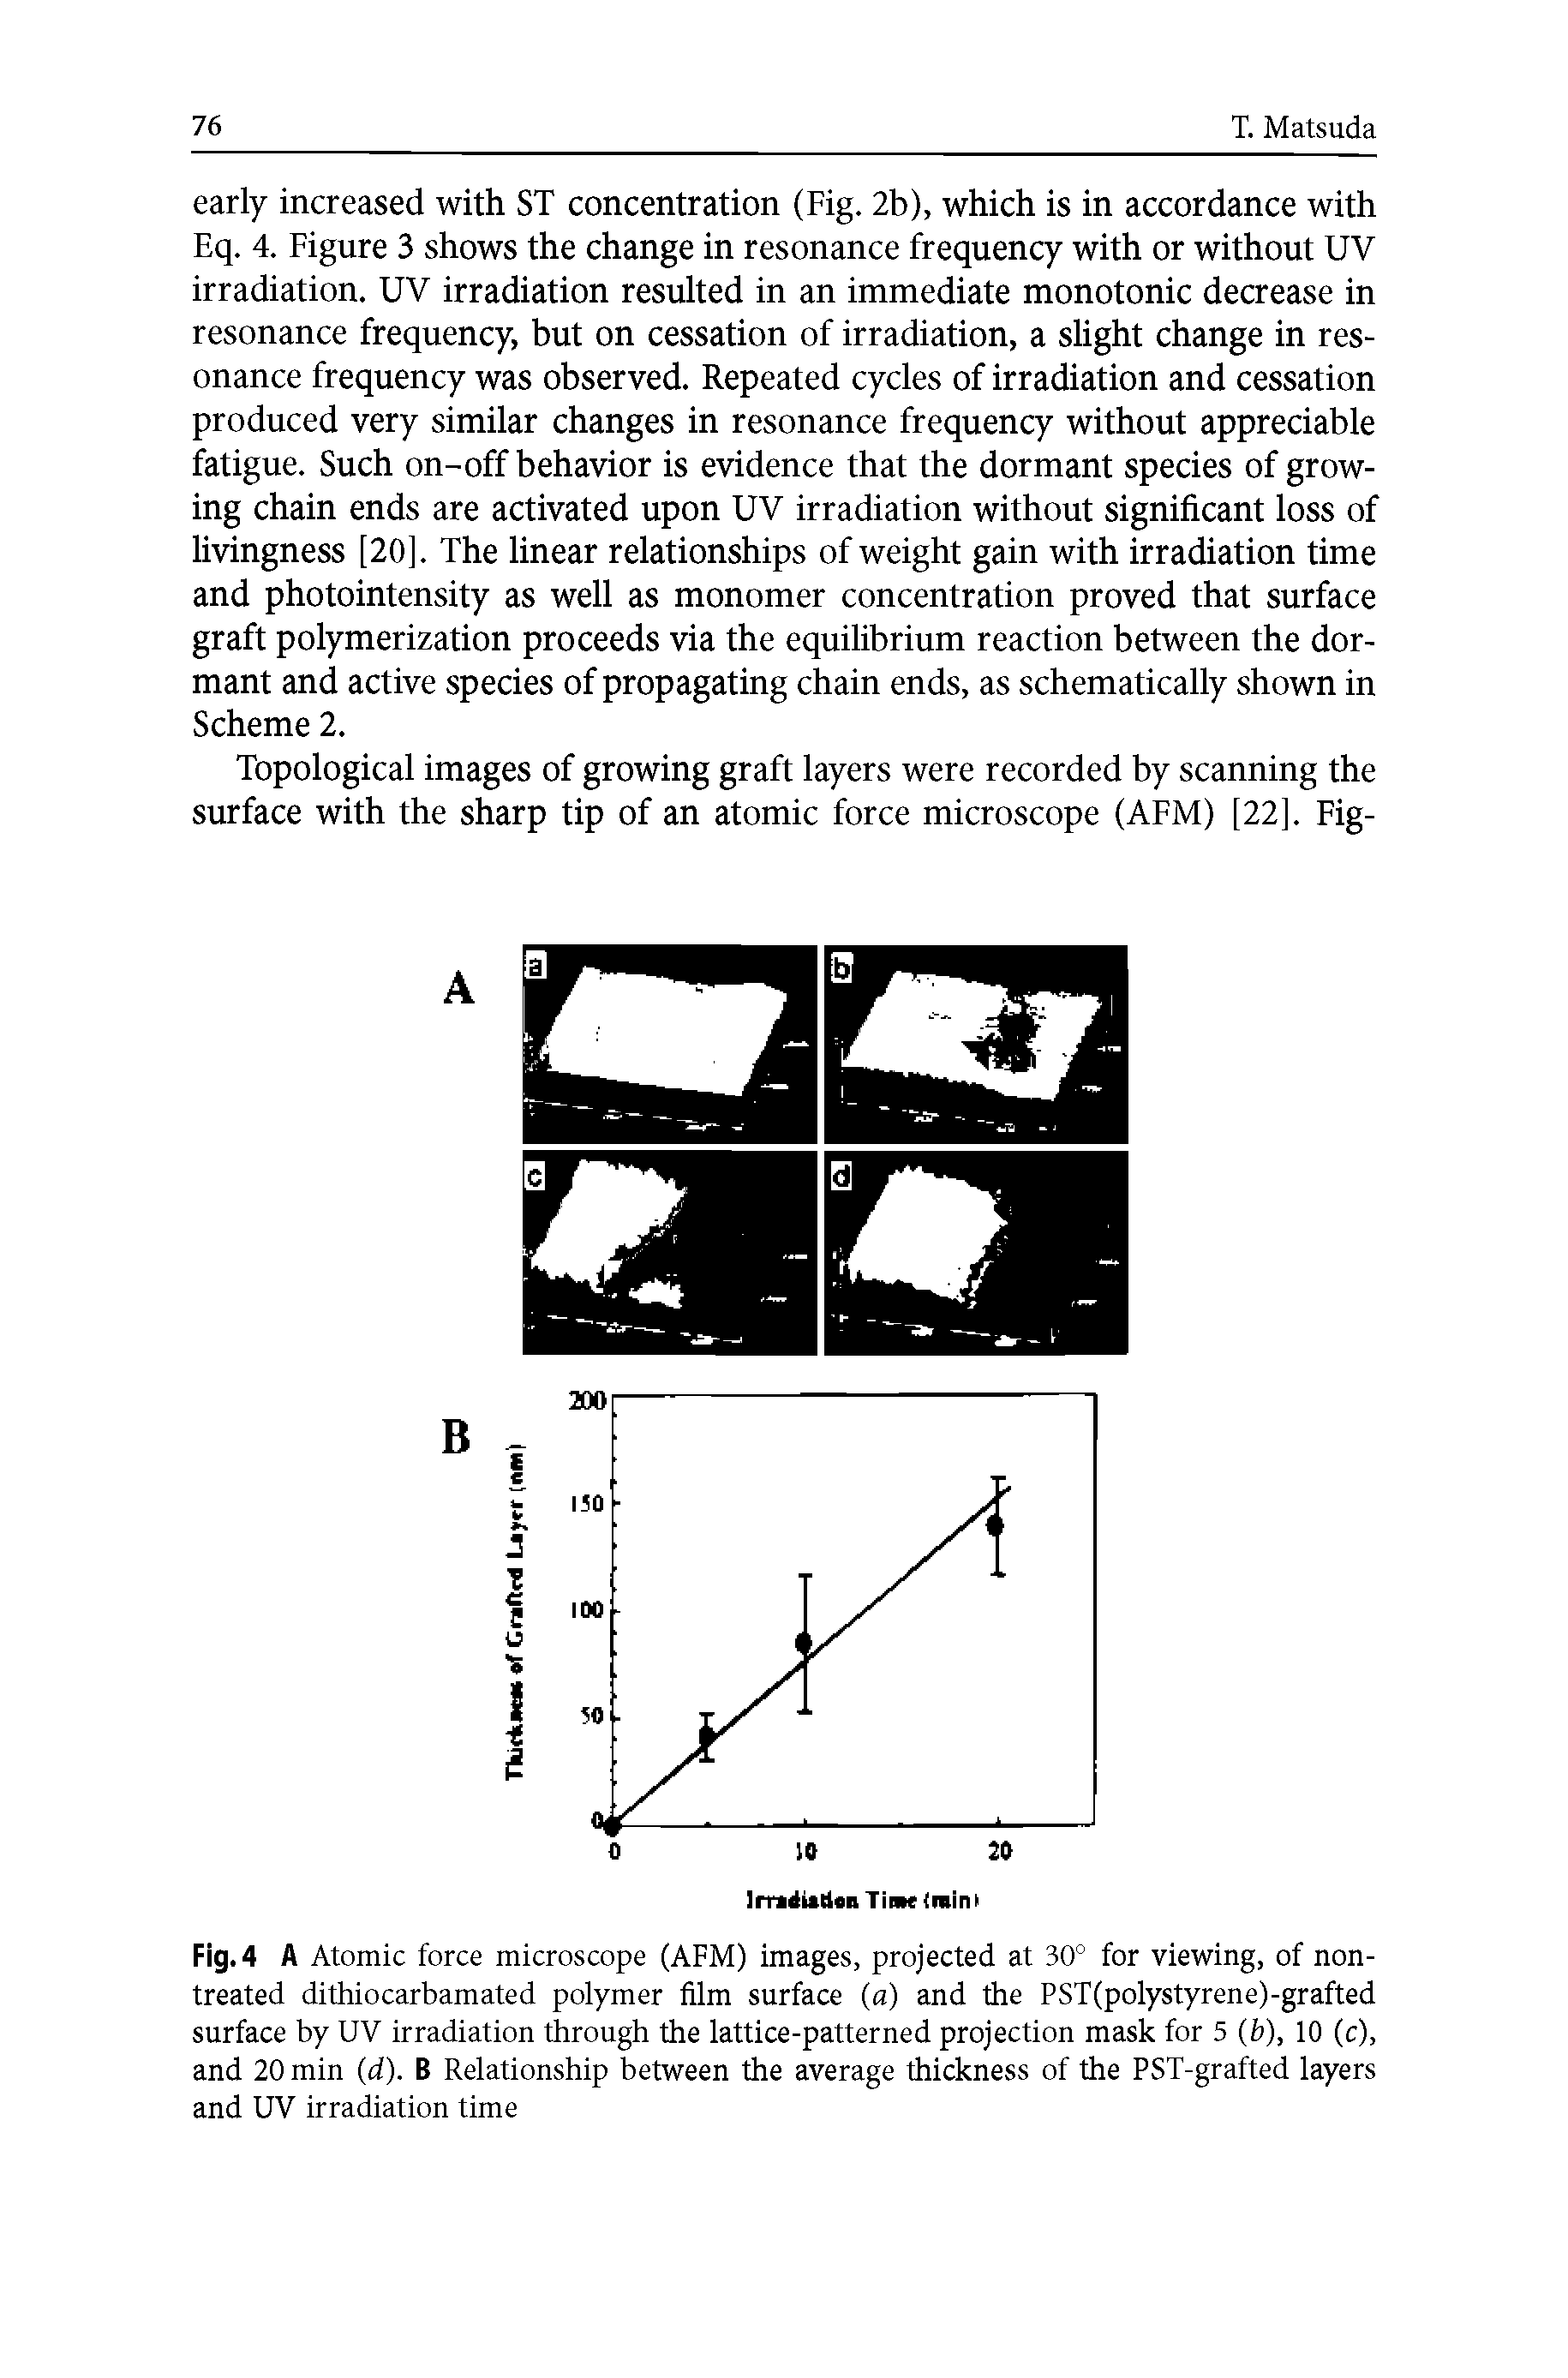 Fig. 4 A Atomic force microscope (AFM) images, projected at 30° for viewing, of non-treated dithiocarbamated polymer film surface (a) and the PST(polystyrene)-grafted surface by UV irradiation through the lattice-patterned projection mask for 5 (fc), 10 (c), and 20 min (d). B Relationship between the average thickness of the PST-grafted layers and UV irradiation time...